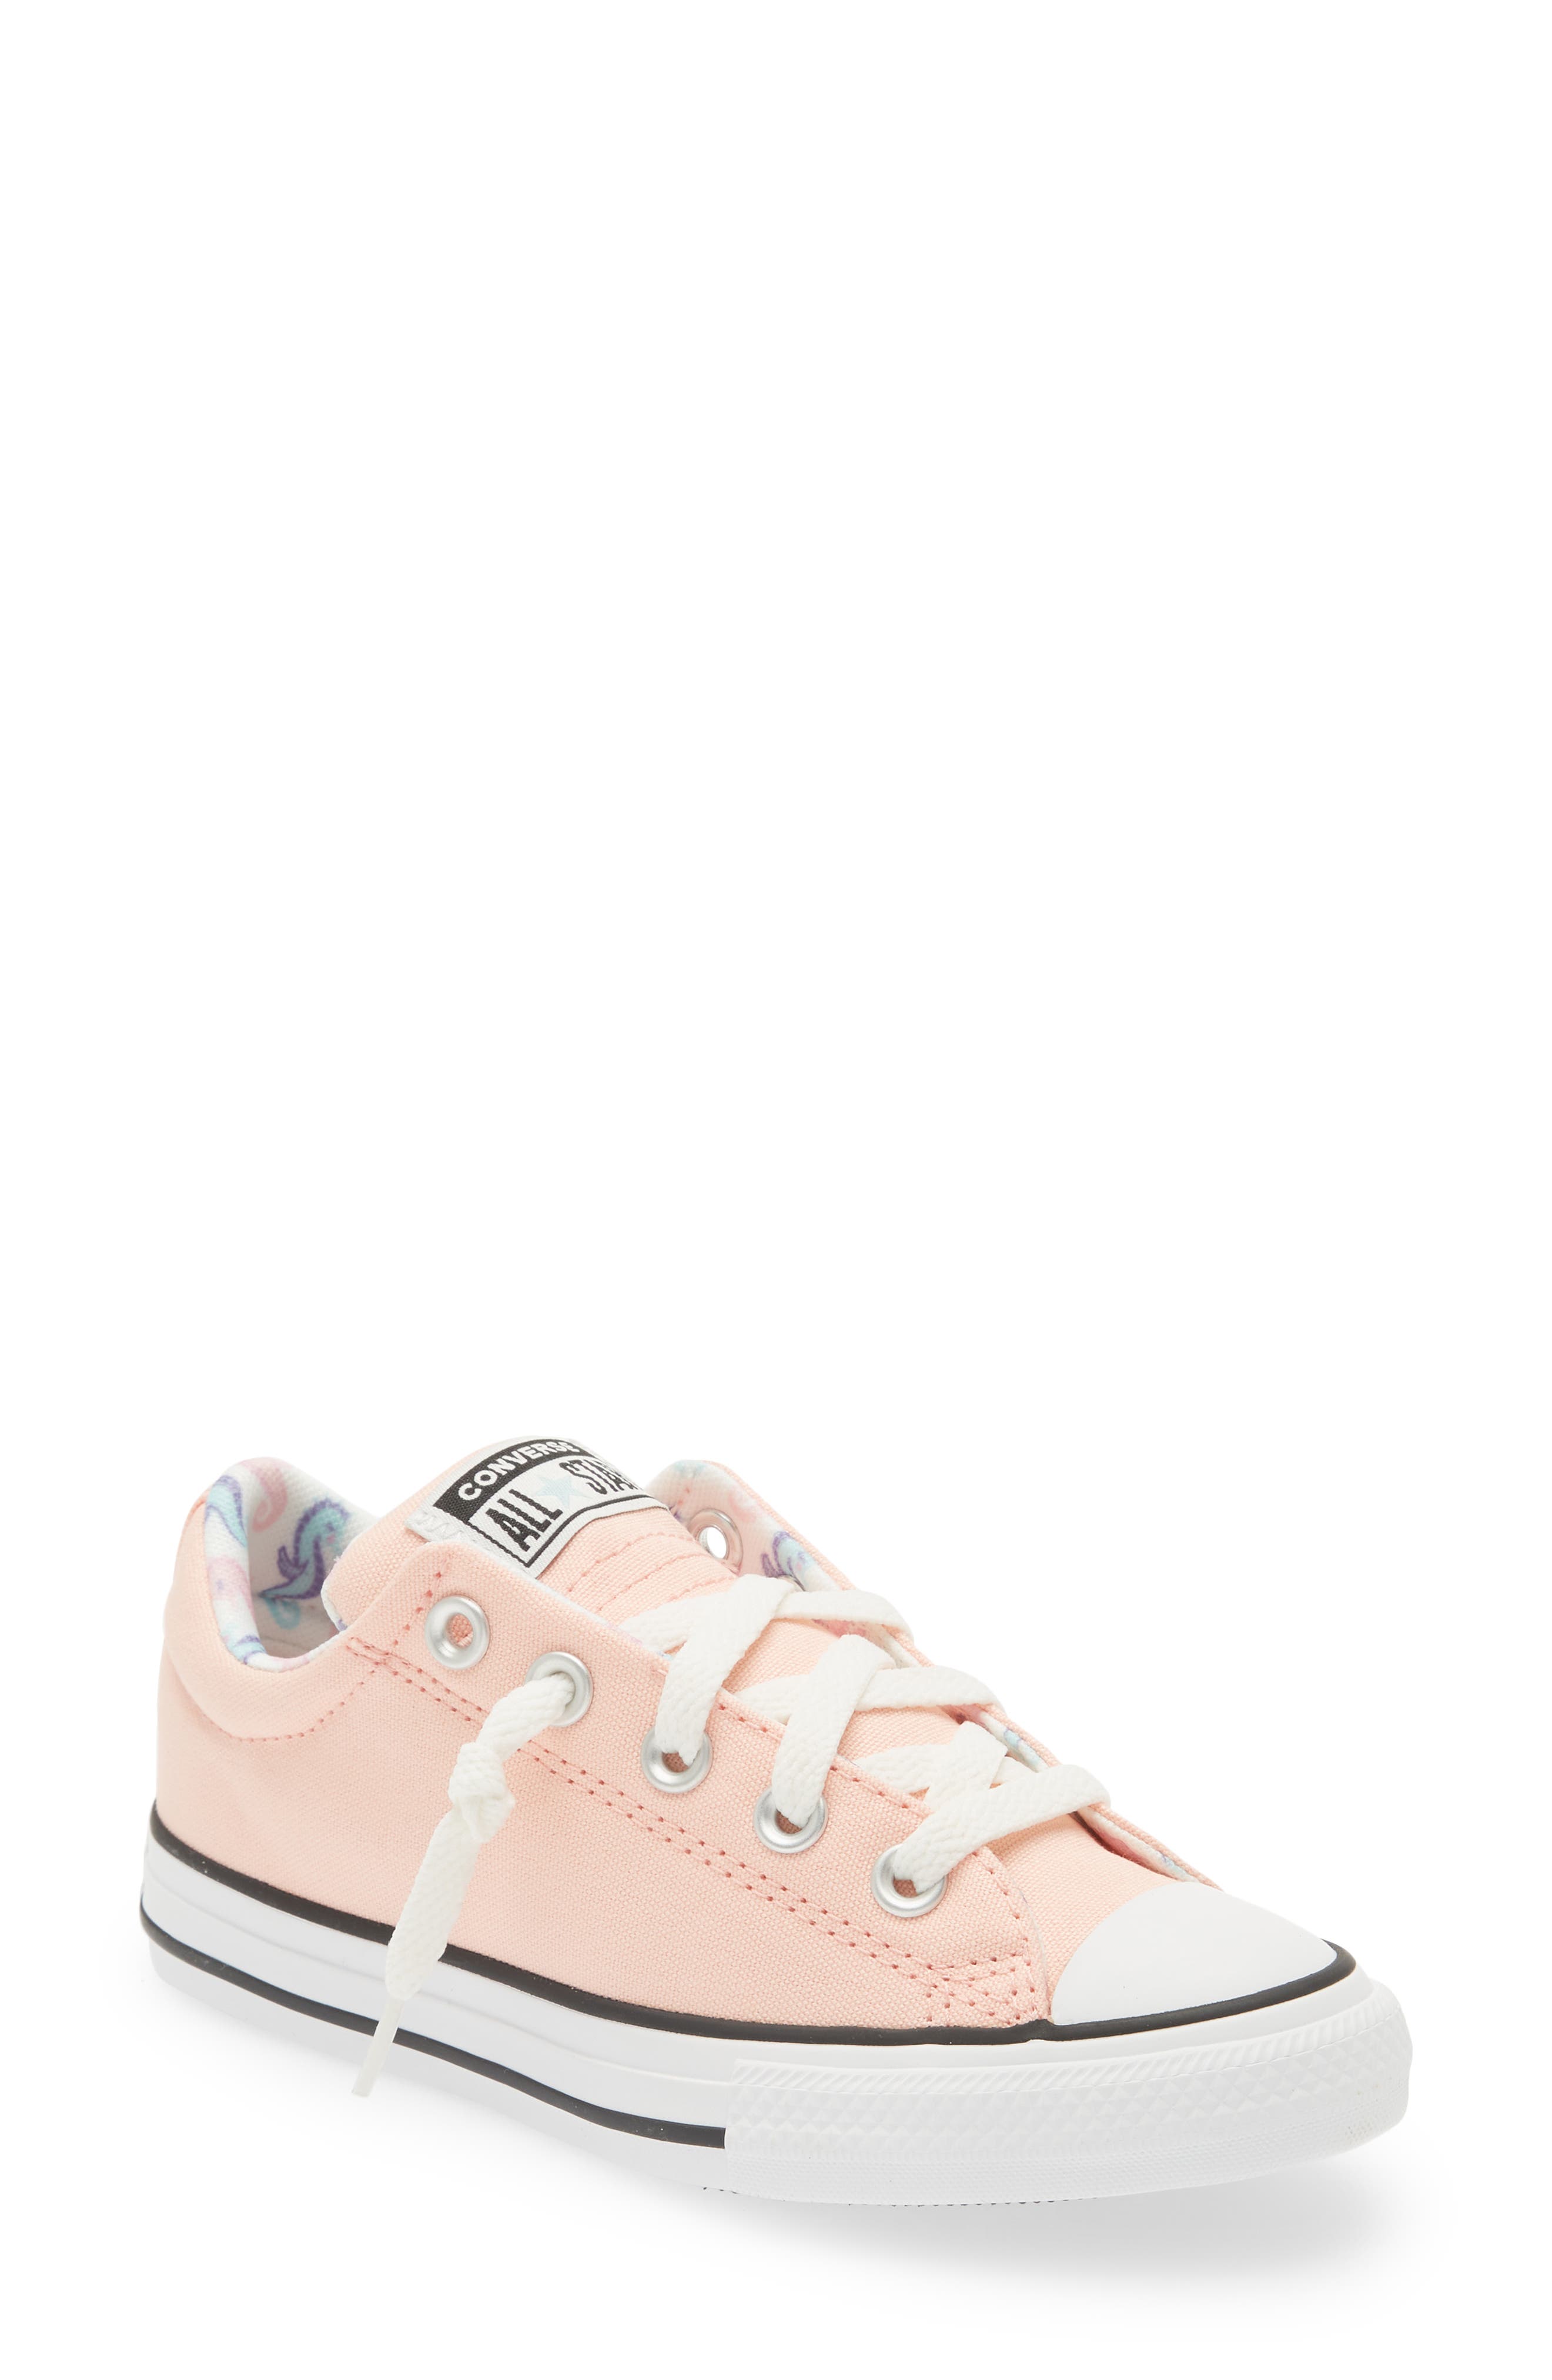 Converse All Star(R) Street Low Top Sneaker in Storm Pink/White/Black